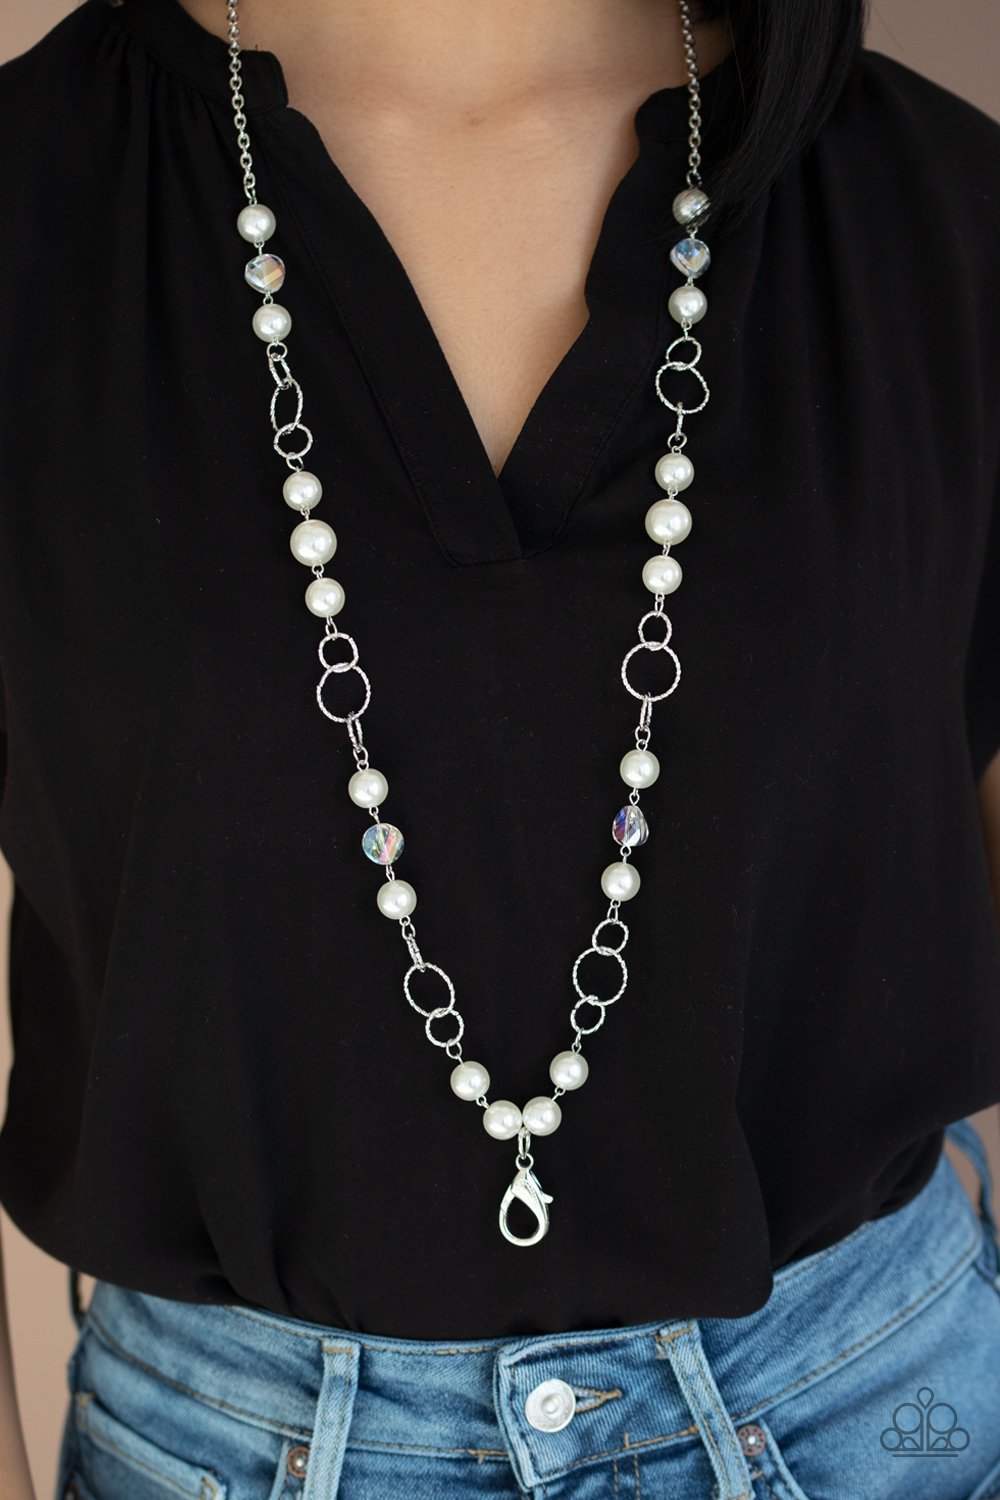 Prized Pearls - White Lanyard Necklace